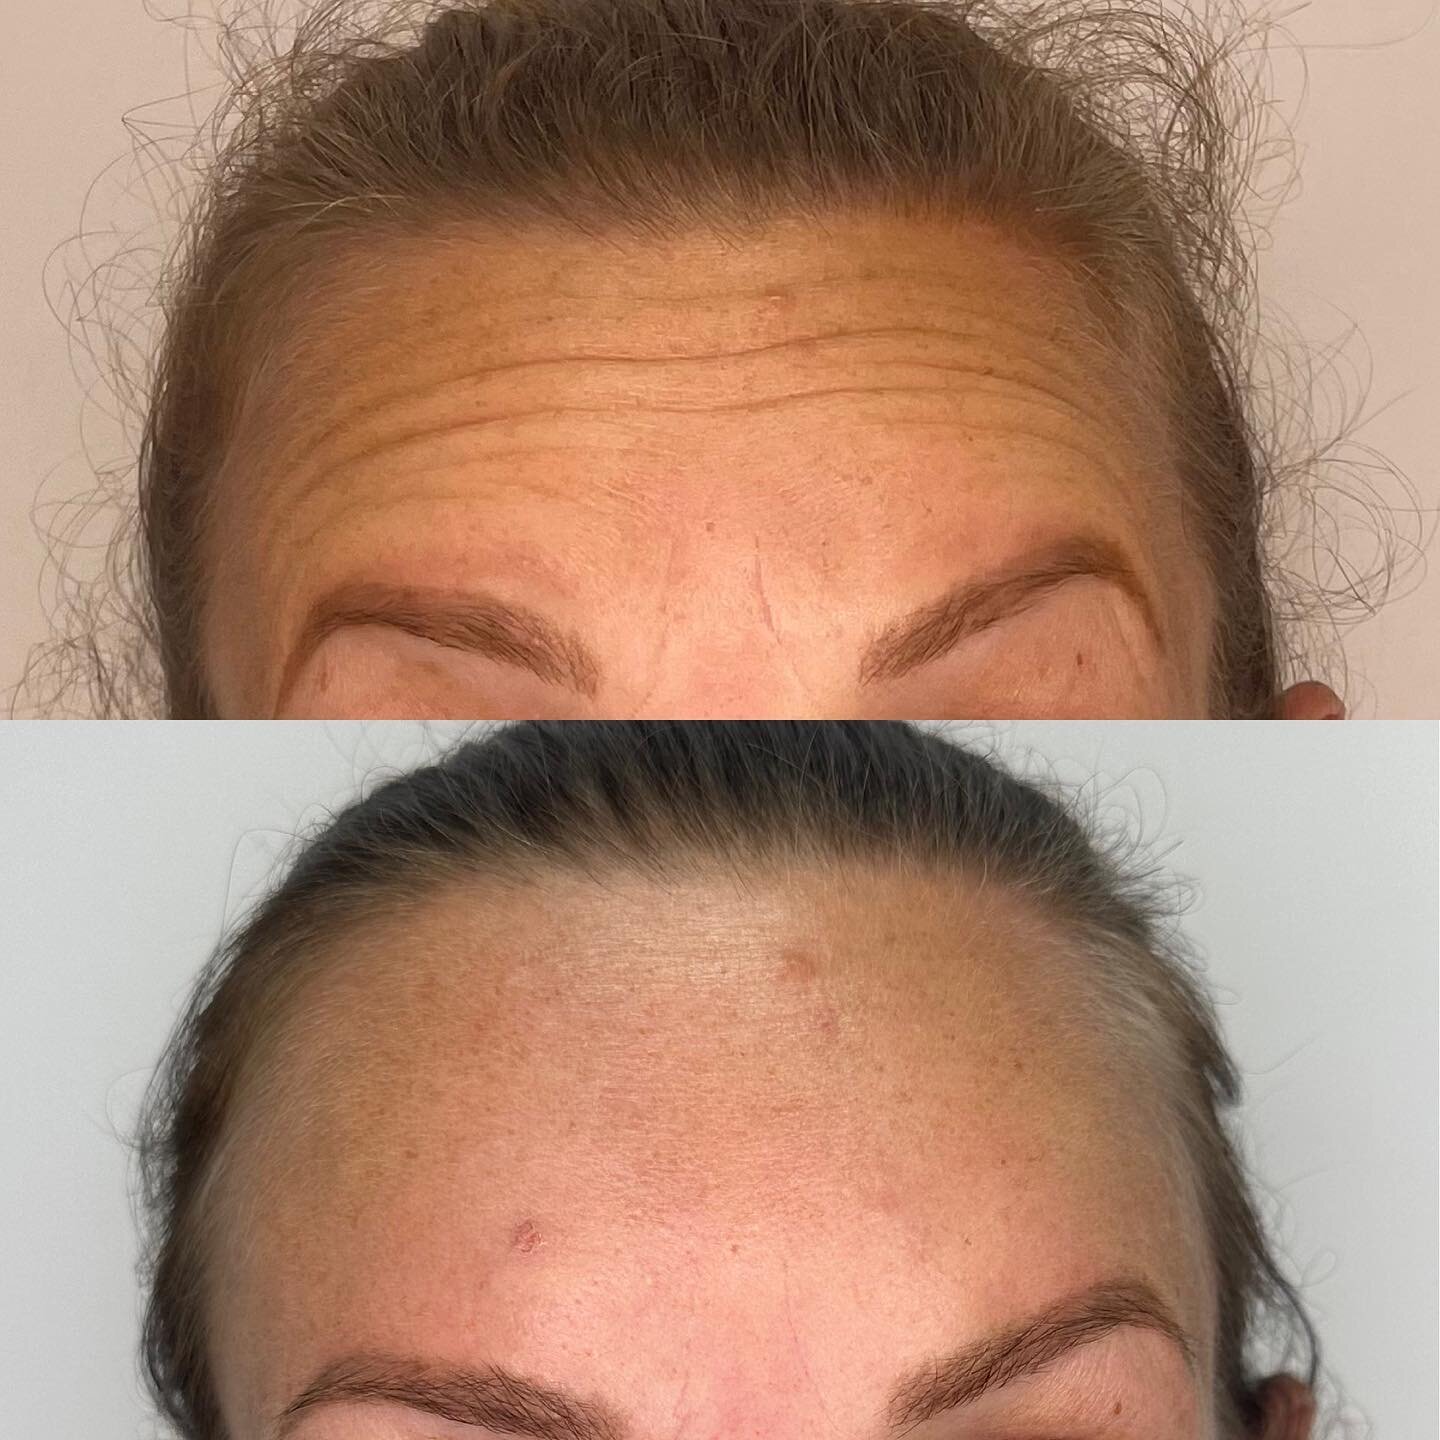 Forehead &amp; frown refresh for this beautiful client 💗🪄*in the 1st photos the client is raising her eyebrows and in the 2nd photos she is frowning. 

#botoxauckland #botoxbeforeandafter #naturallookbotox